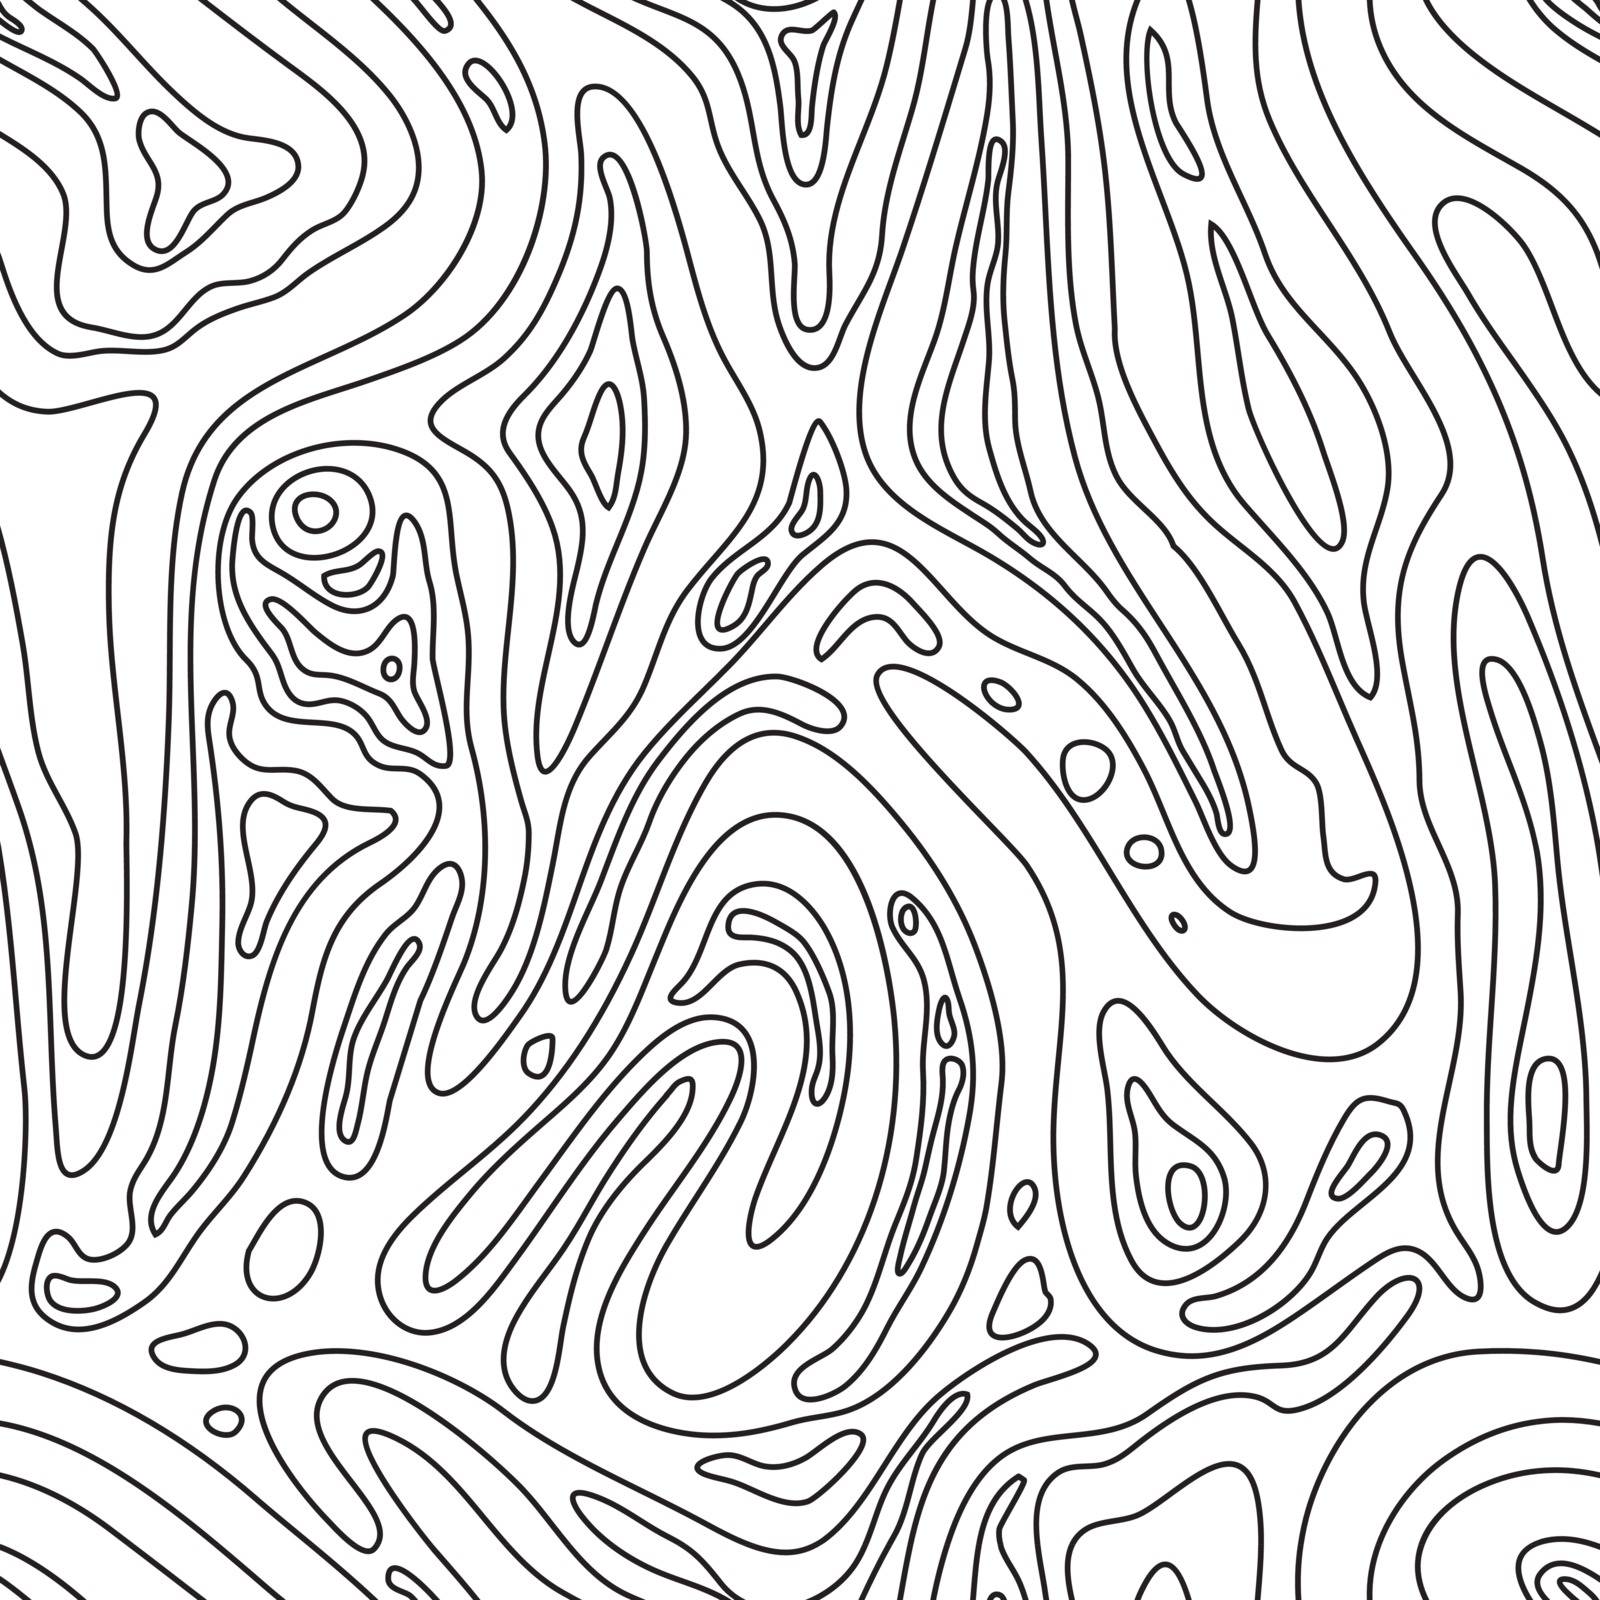 Universal seamless abstract topographic pattern doodle geometric lines in retro memphis style, fashion, black, white color. It can be used in printing, website backdrop, fabric design